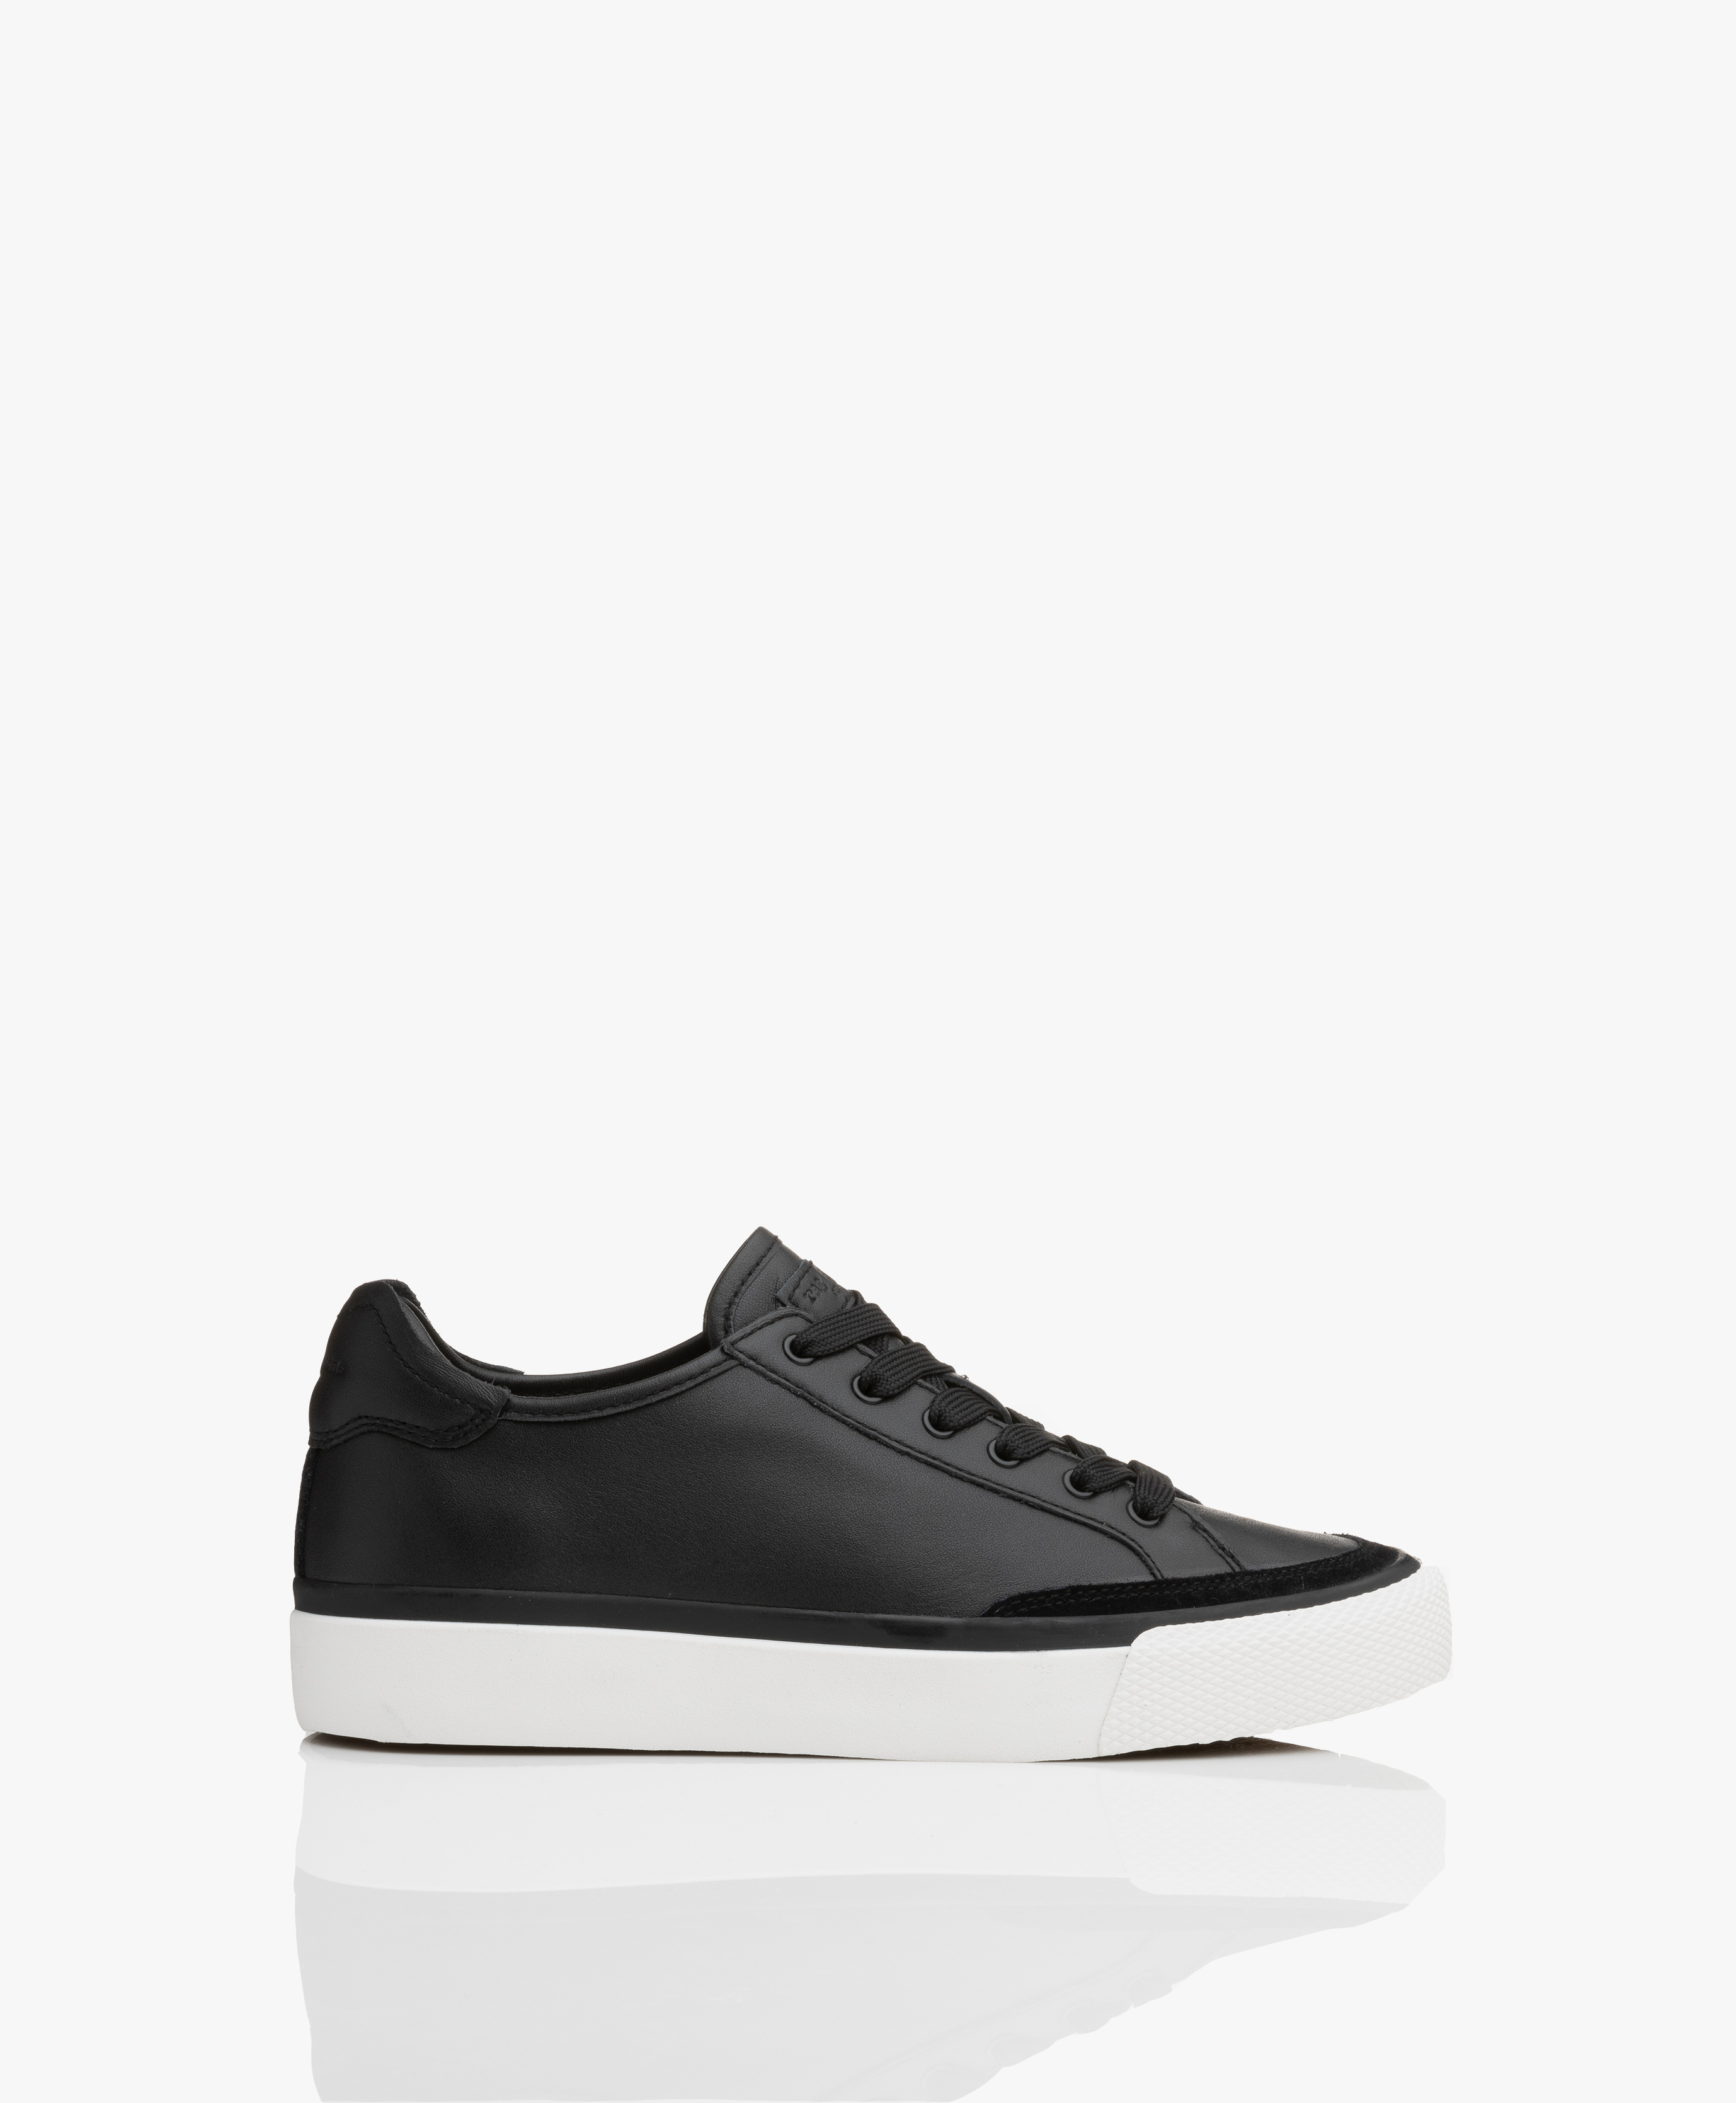 rag and bone army low sneaker